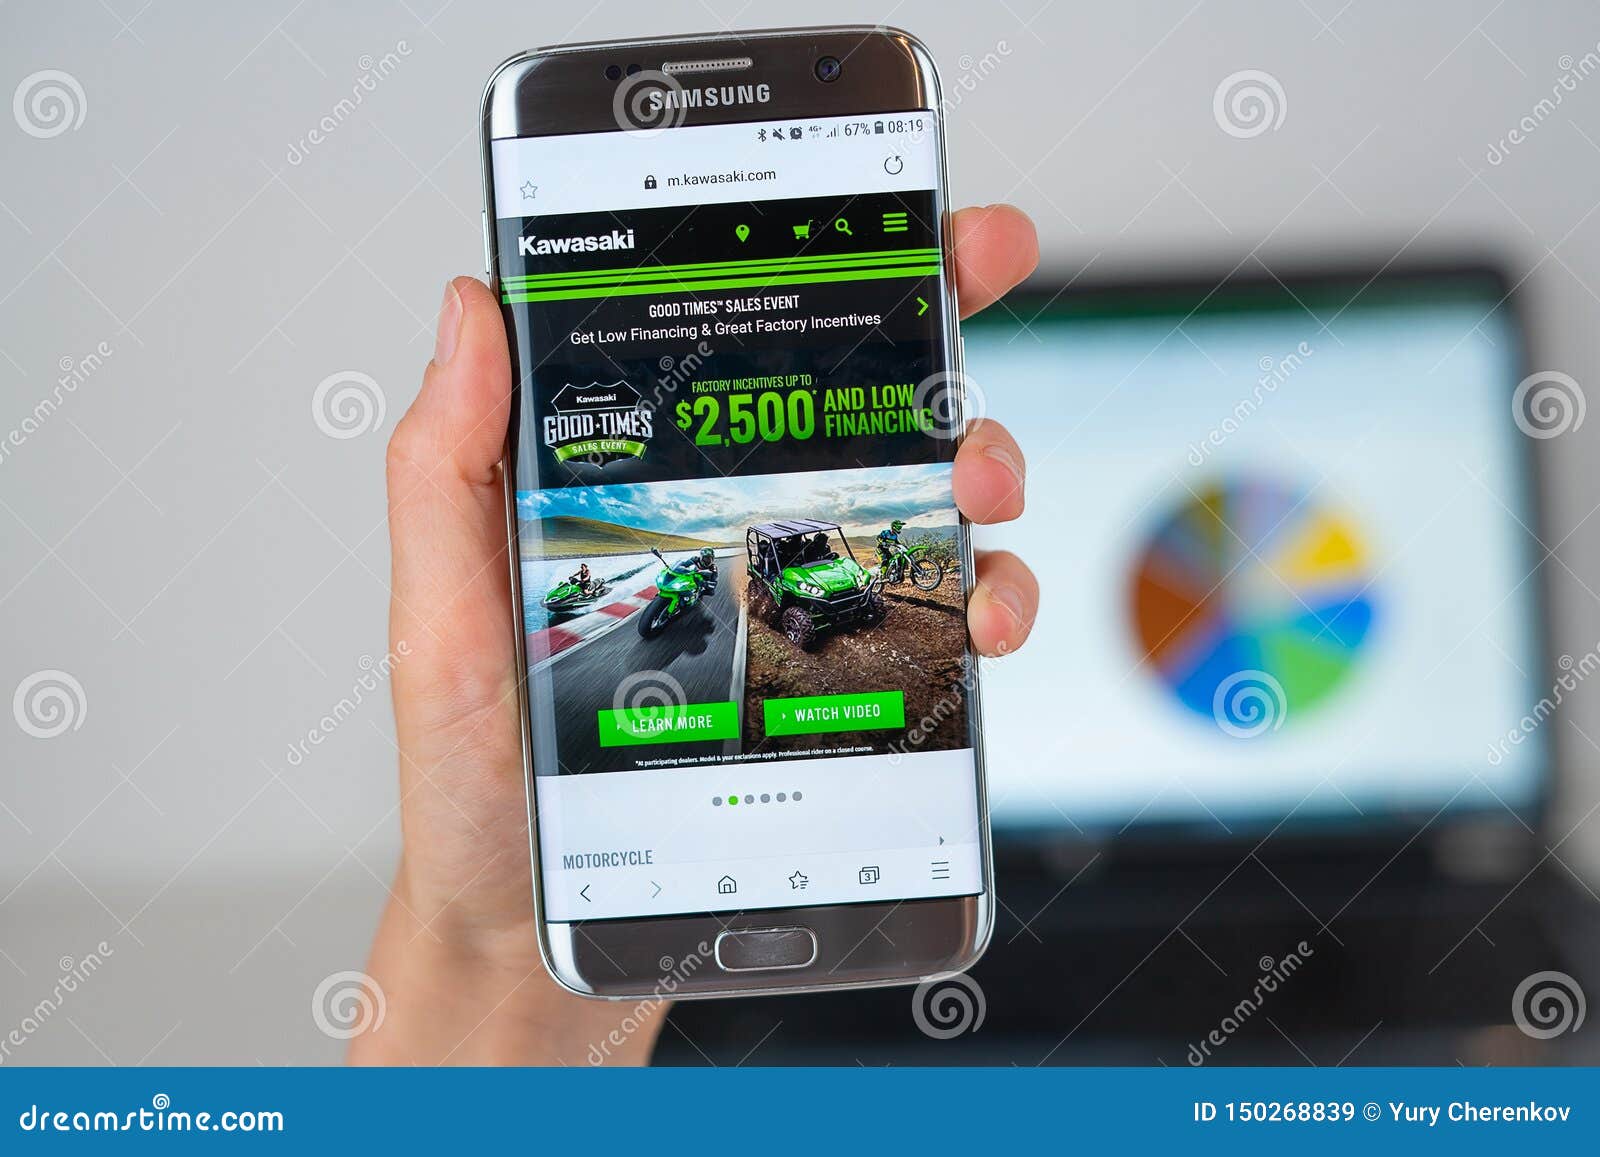 Web Site of Kawasaki Company on Phone Editorial Stock - Image of cell, business: 150268839